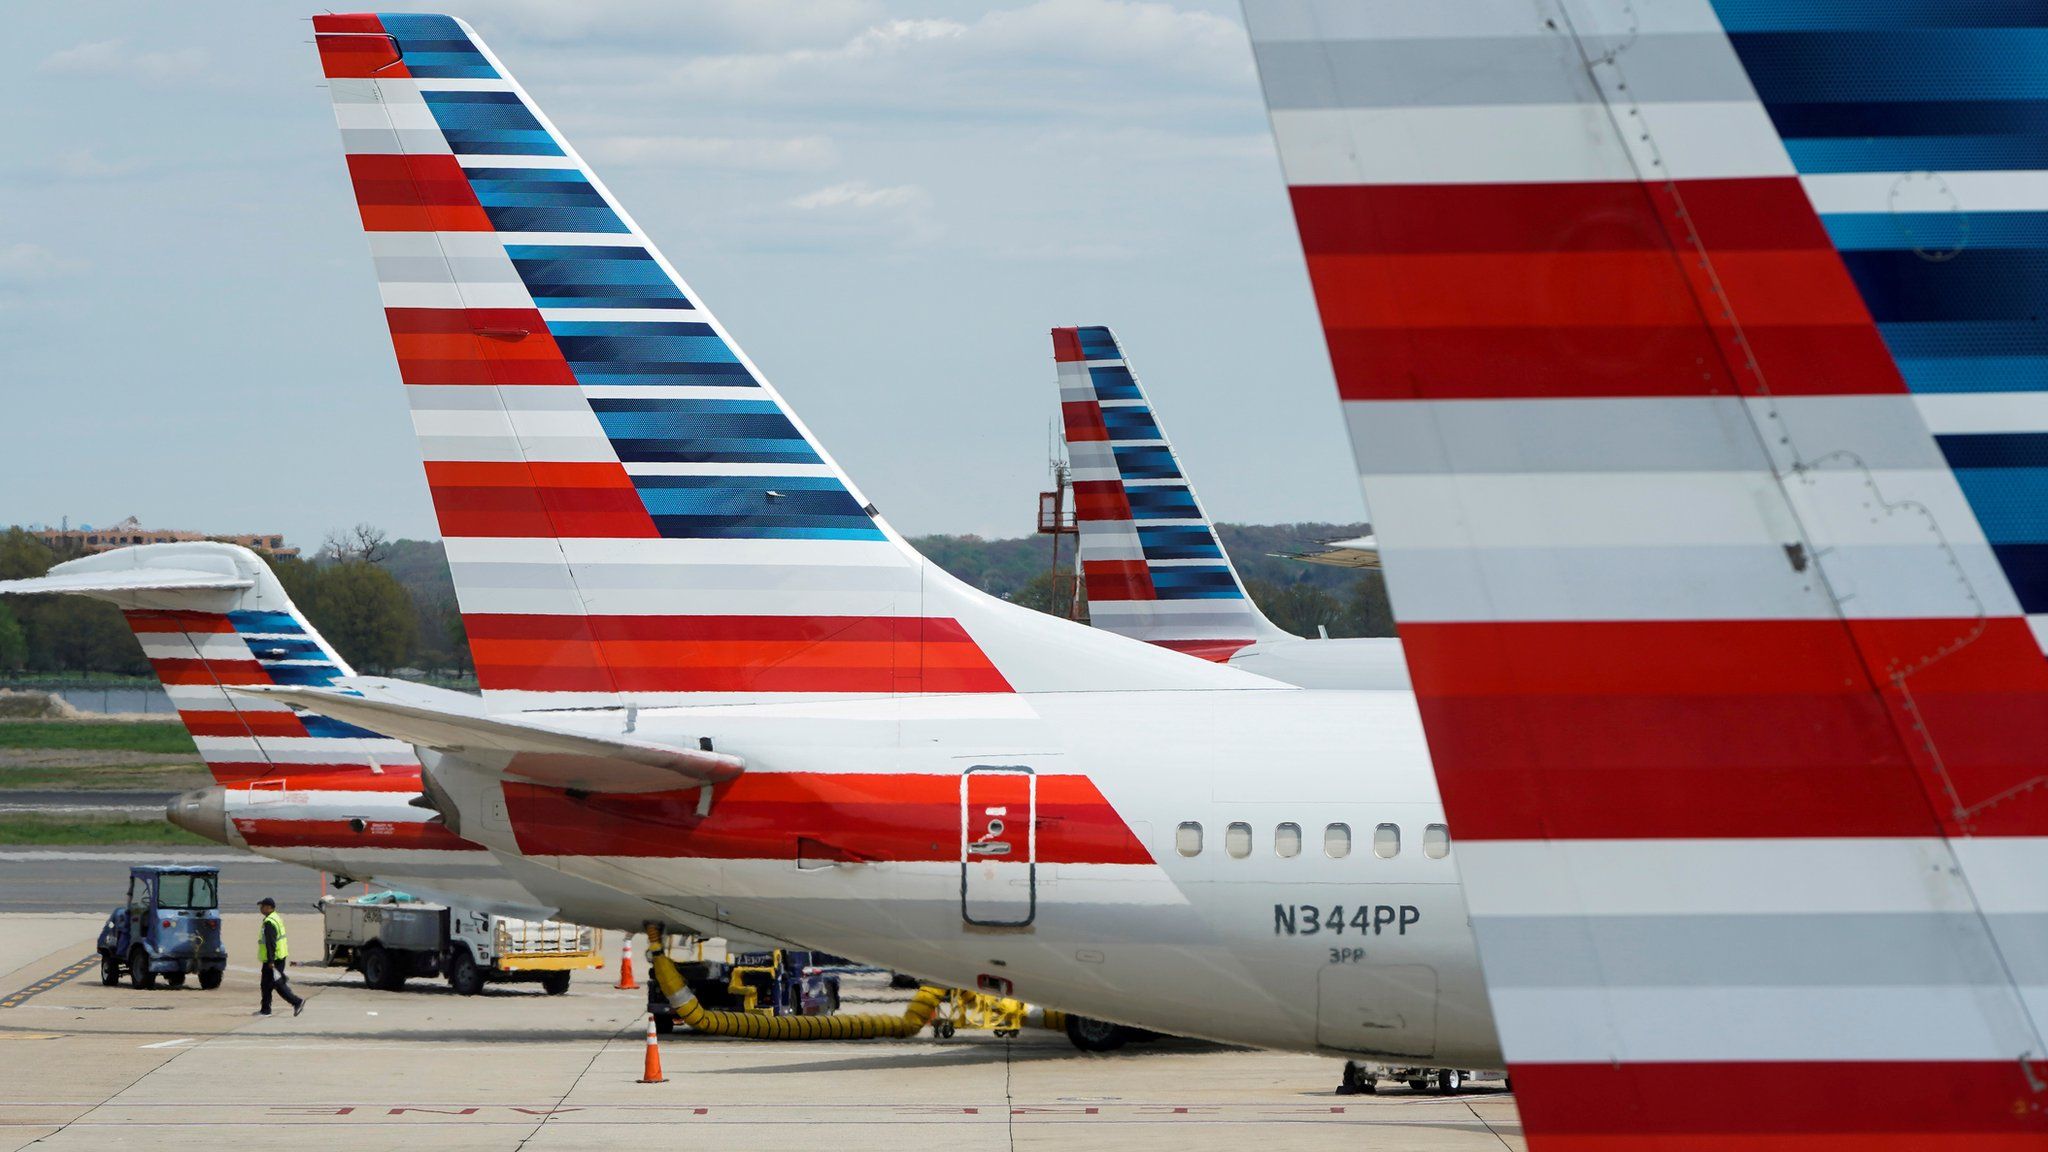 A member of a ground crew walks past American Airlines planes parked at the gate during the coronavirus disease (COVID-19) outbreak at Ronald Reagan National Airport in Washington, U.S., April 5, 2020.